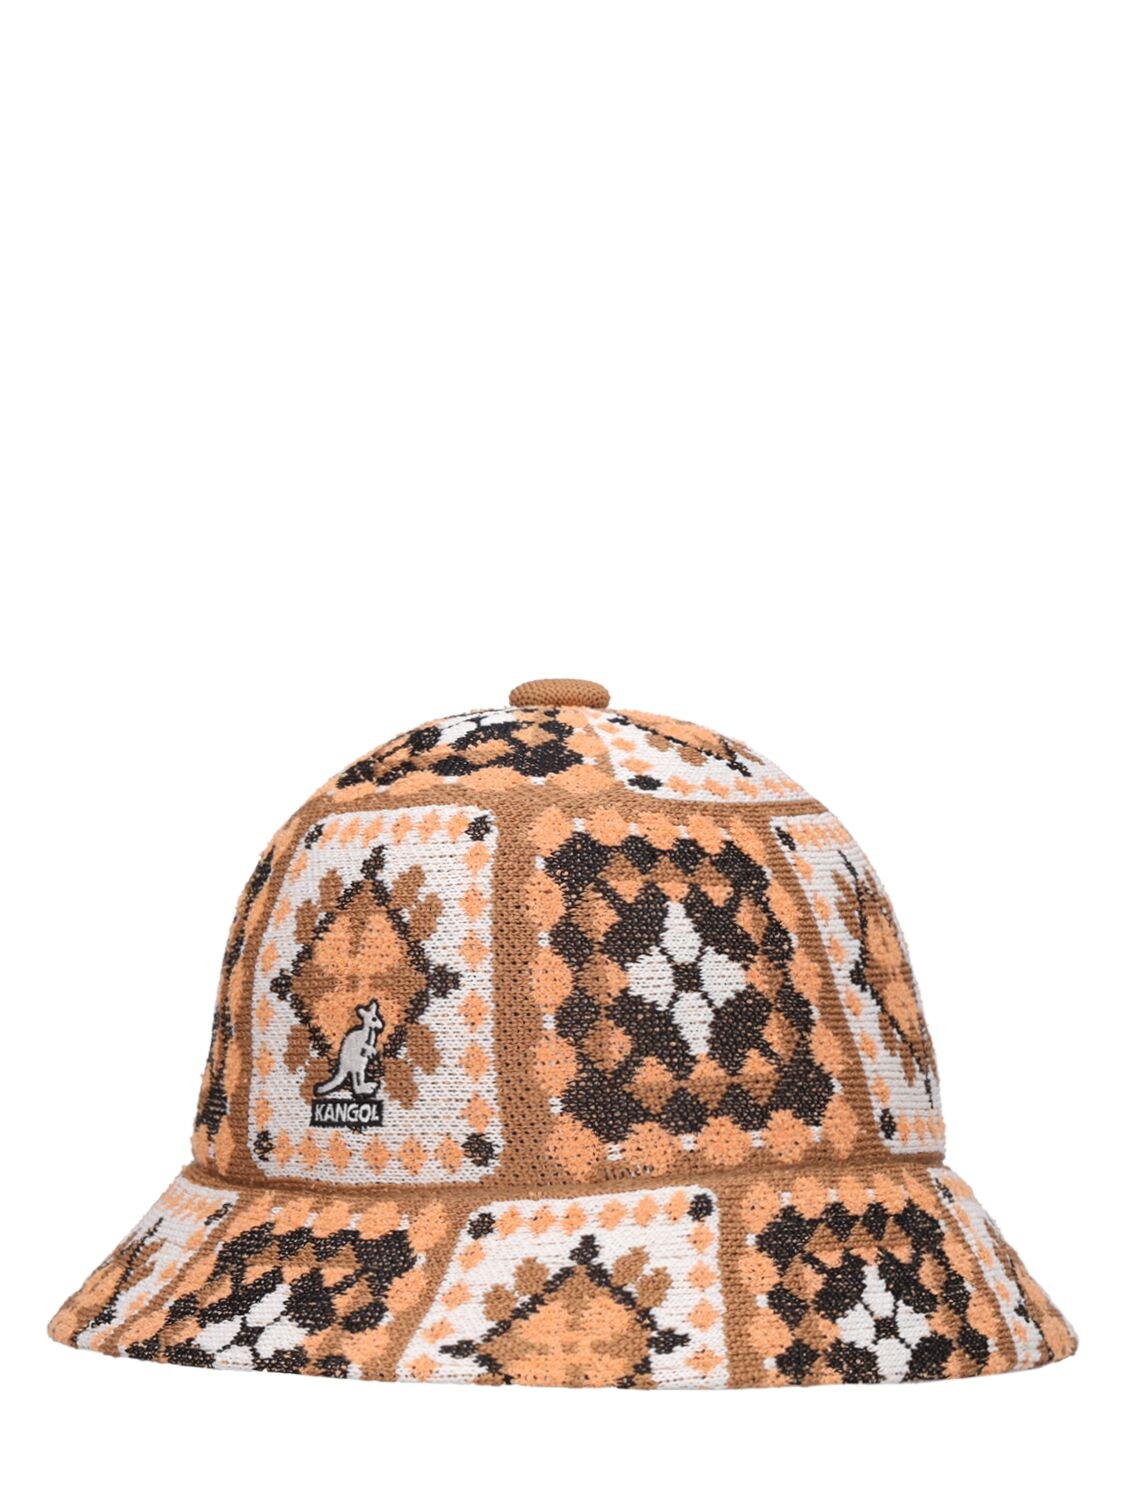 Arts & Crafts Casual Bucket Hat In Patterned Brown